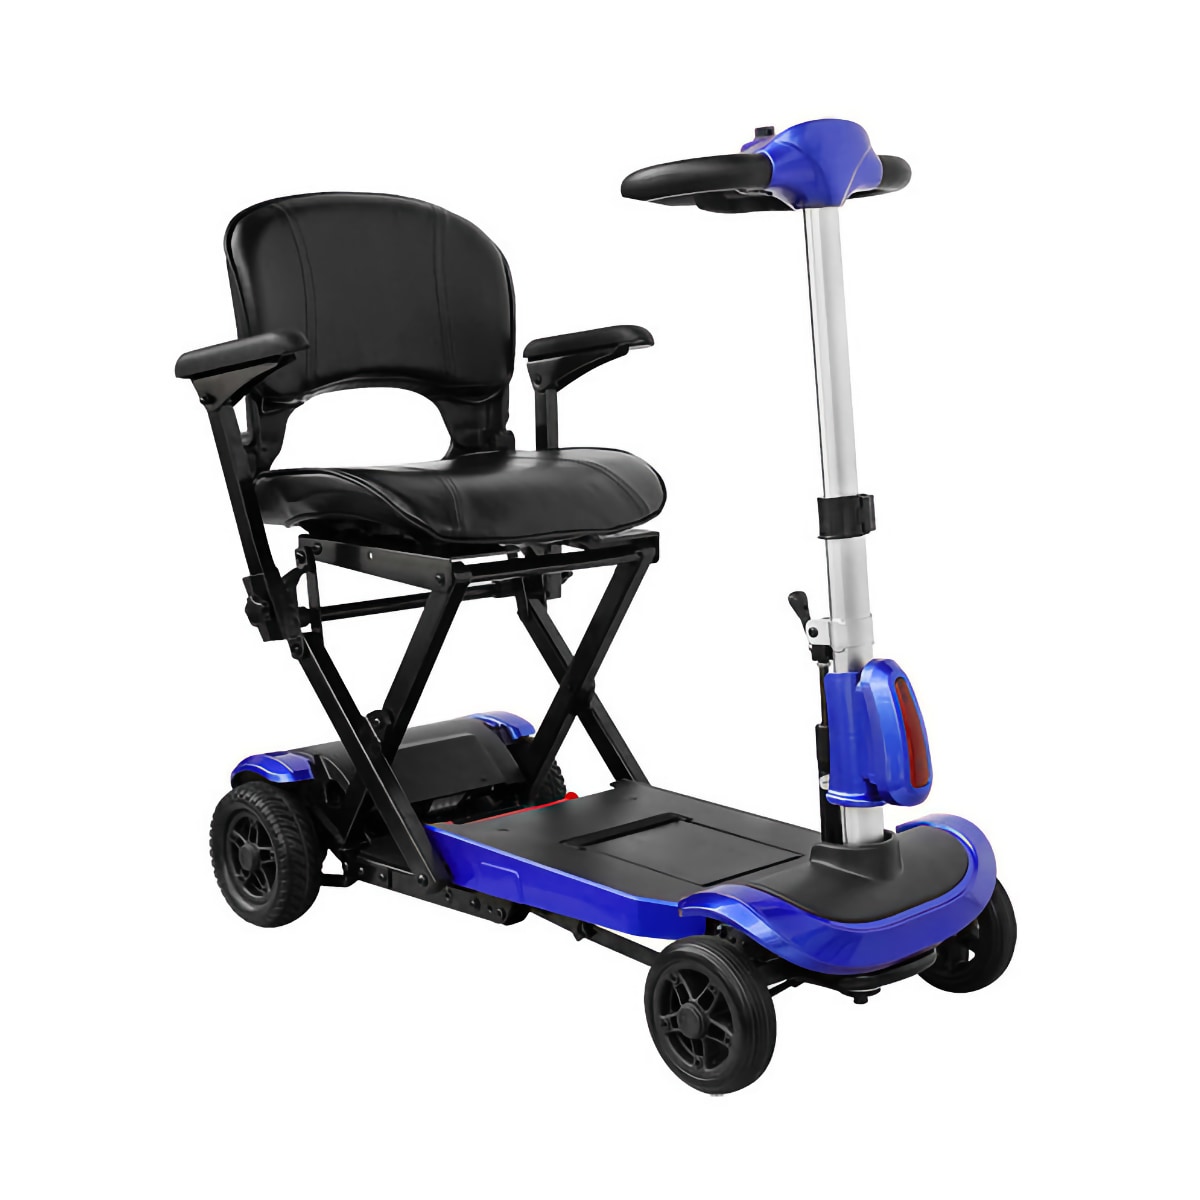 ZooMe mobility scooter with blue accents